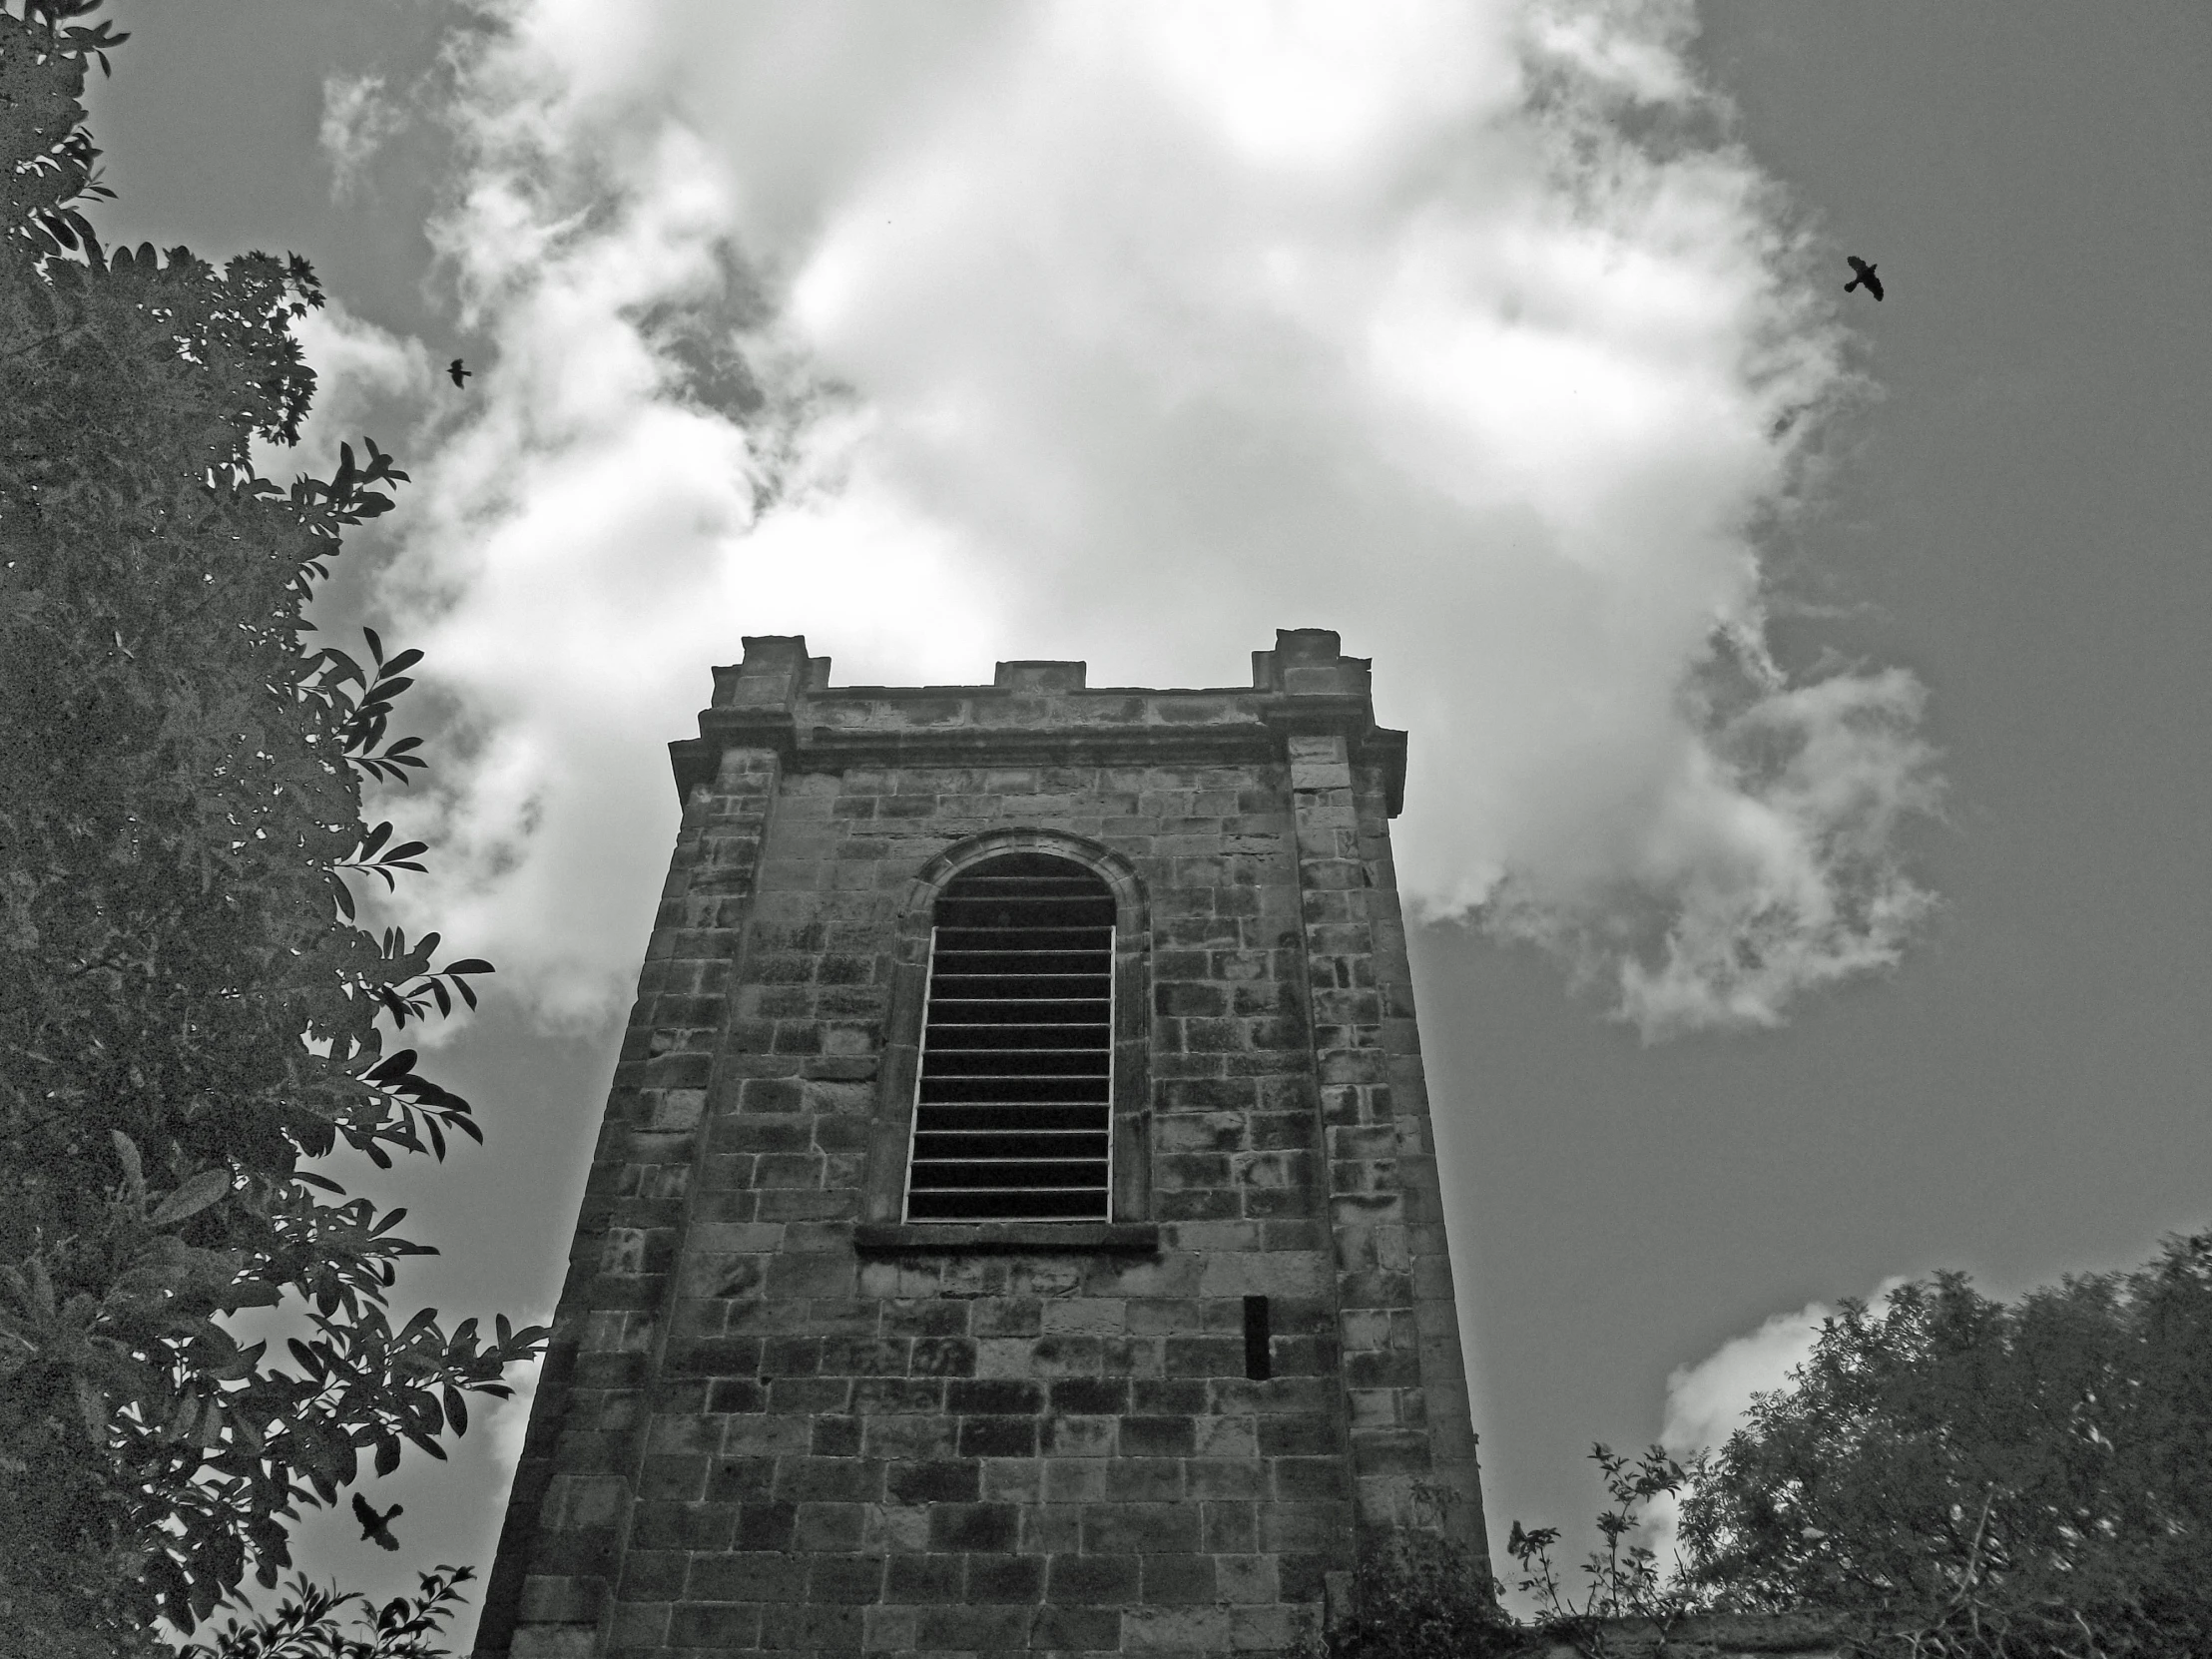 a black and white po shows the side of a tower with clouds above